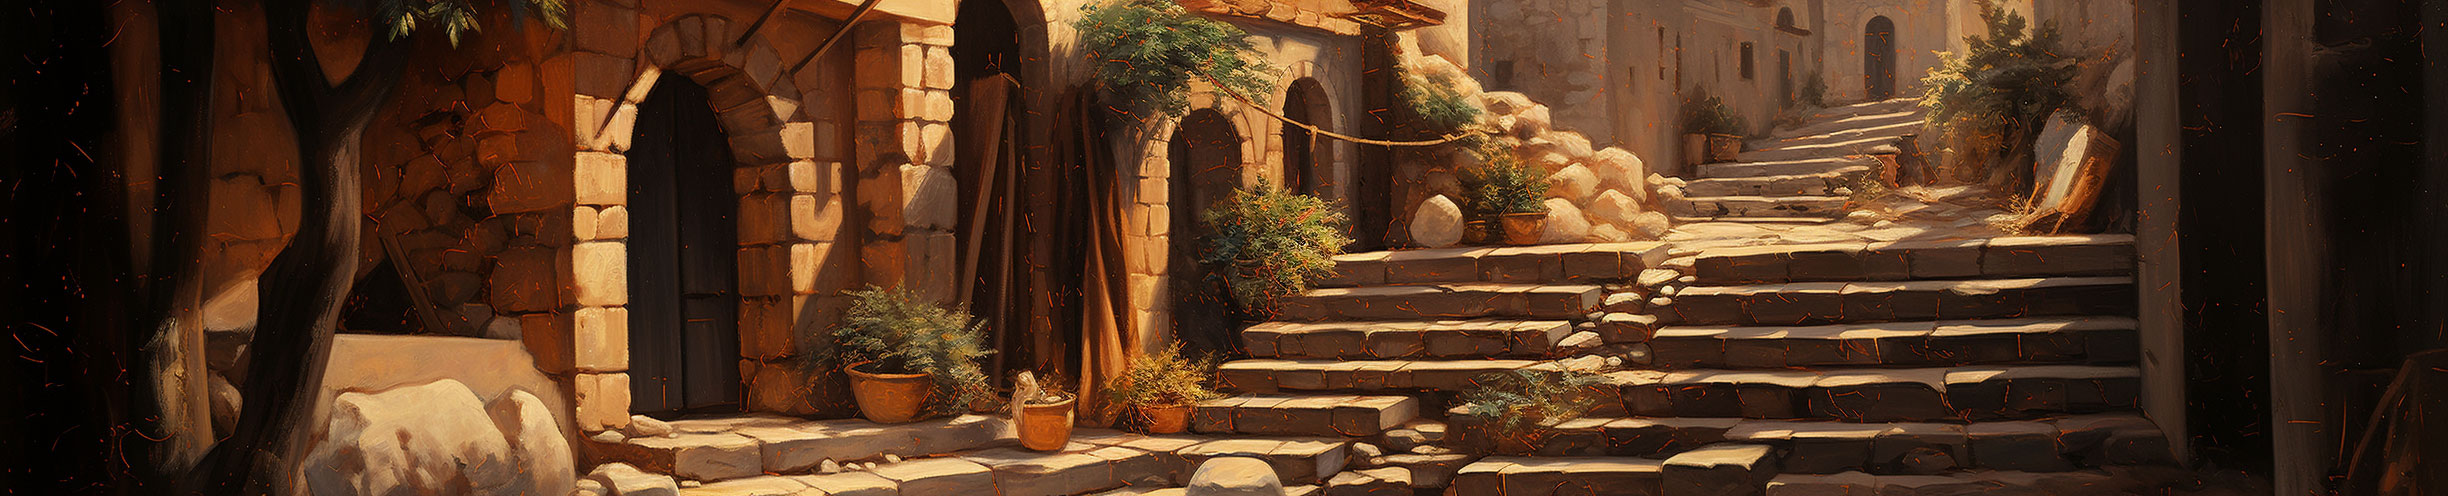 tychodreq_a_finely_detailed_oil_painting_of_a_stone_stairs_lead_772a7fac-45e7-4788-80d9-b25c29b93027.jpg